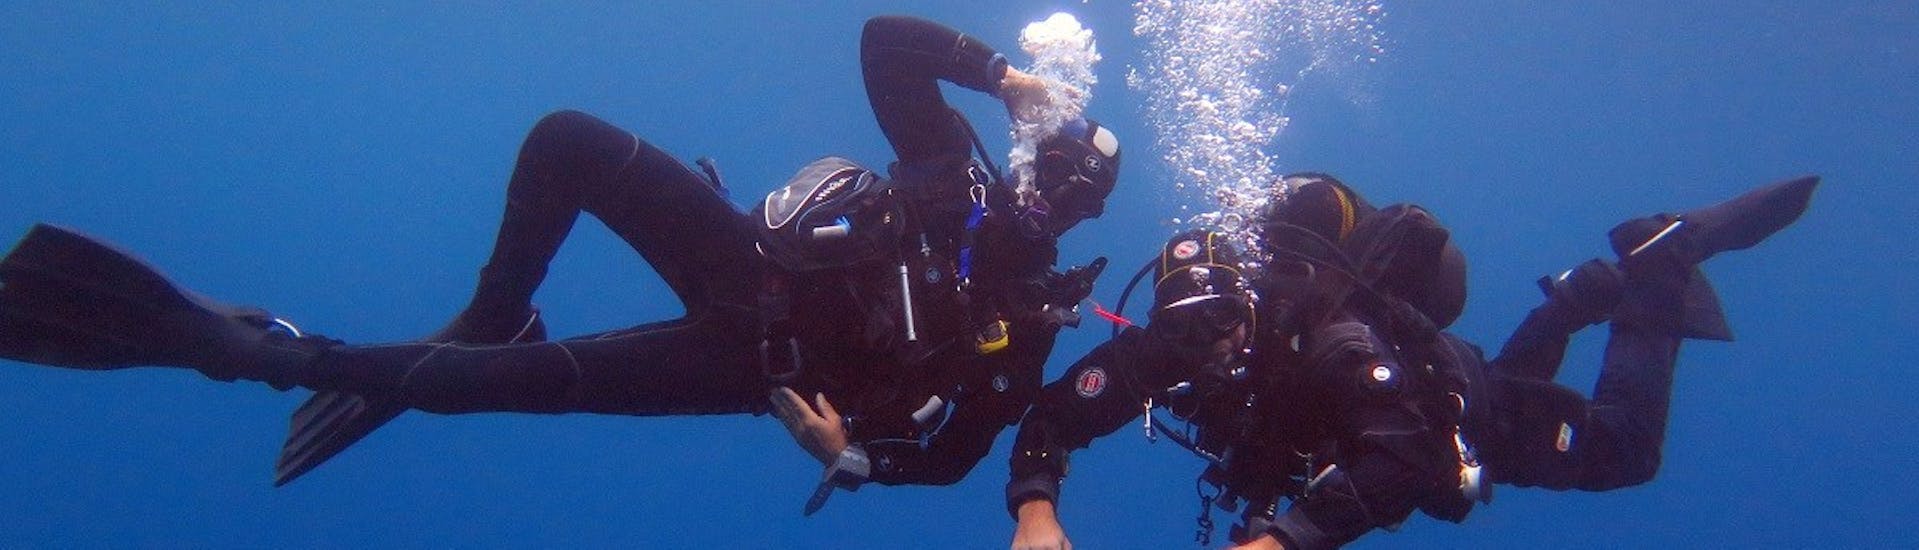 People having scuba diving fun with our Guided & Unguided Dive at the Cerbère-Banyuls Marine Nature Reserve from Magellan Plongée Argelès-sur-Mer.